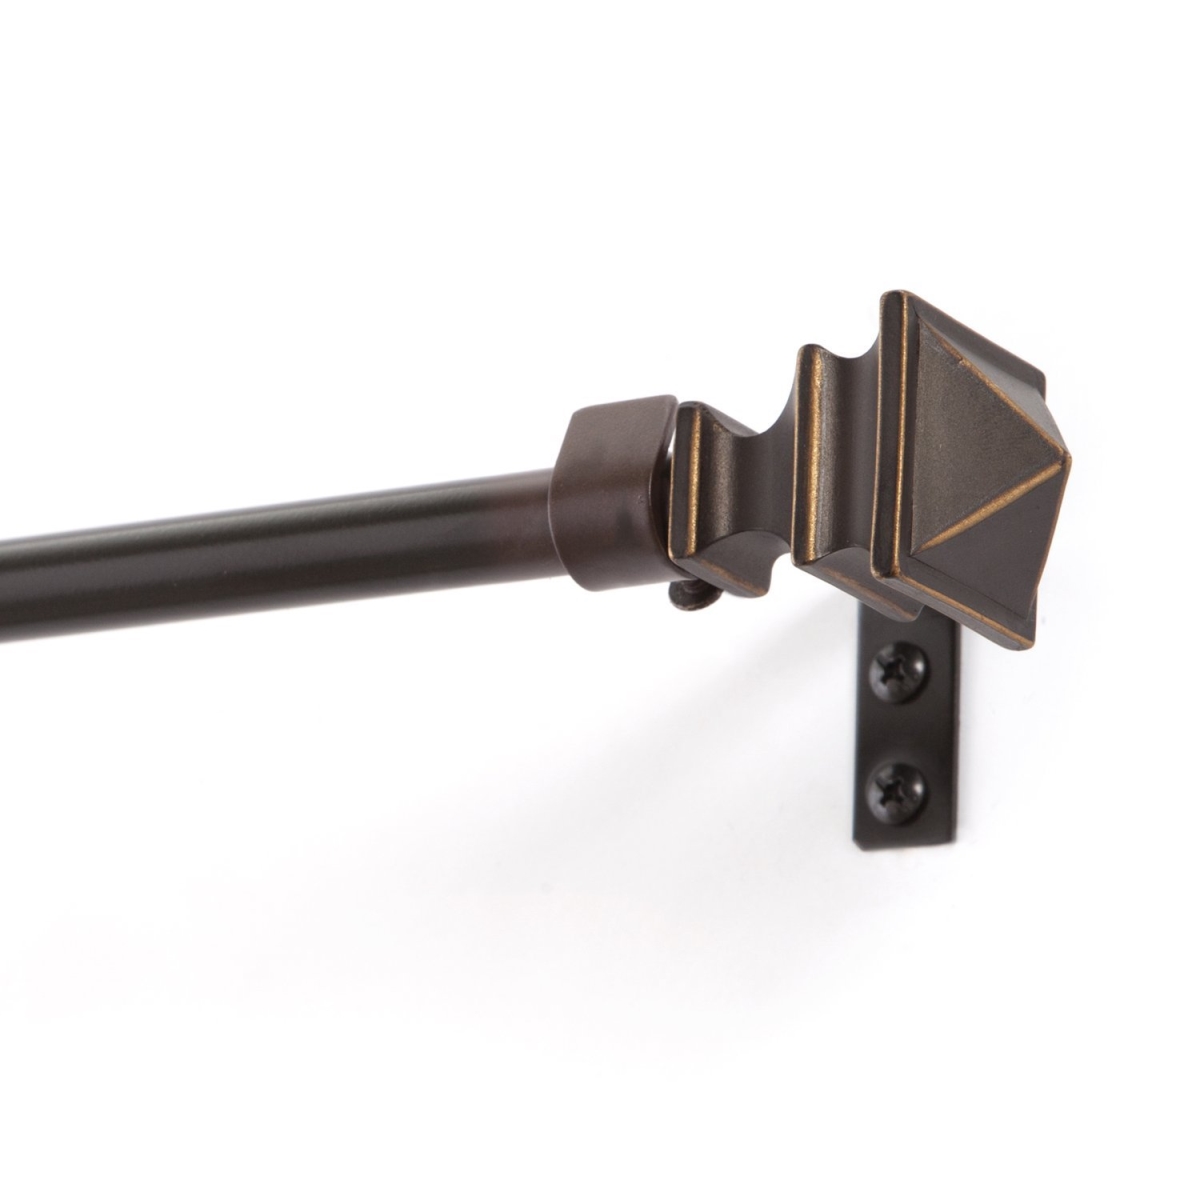 32-lwf1017-2orb 48-88 In. Painted Oil Rubbed Bronze Finish Single Rod Window Hardware With Square Mocha Finial